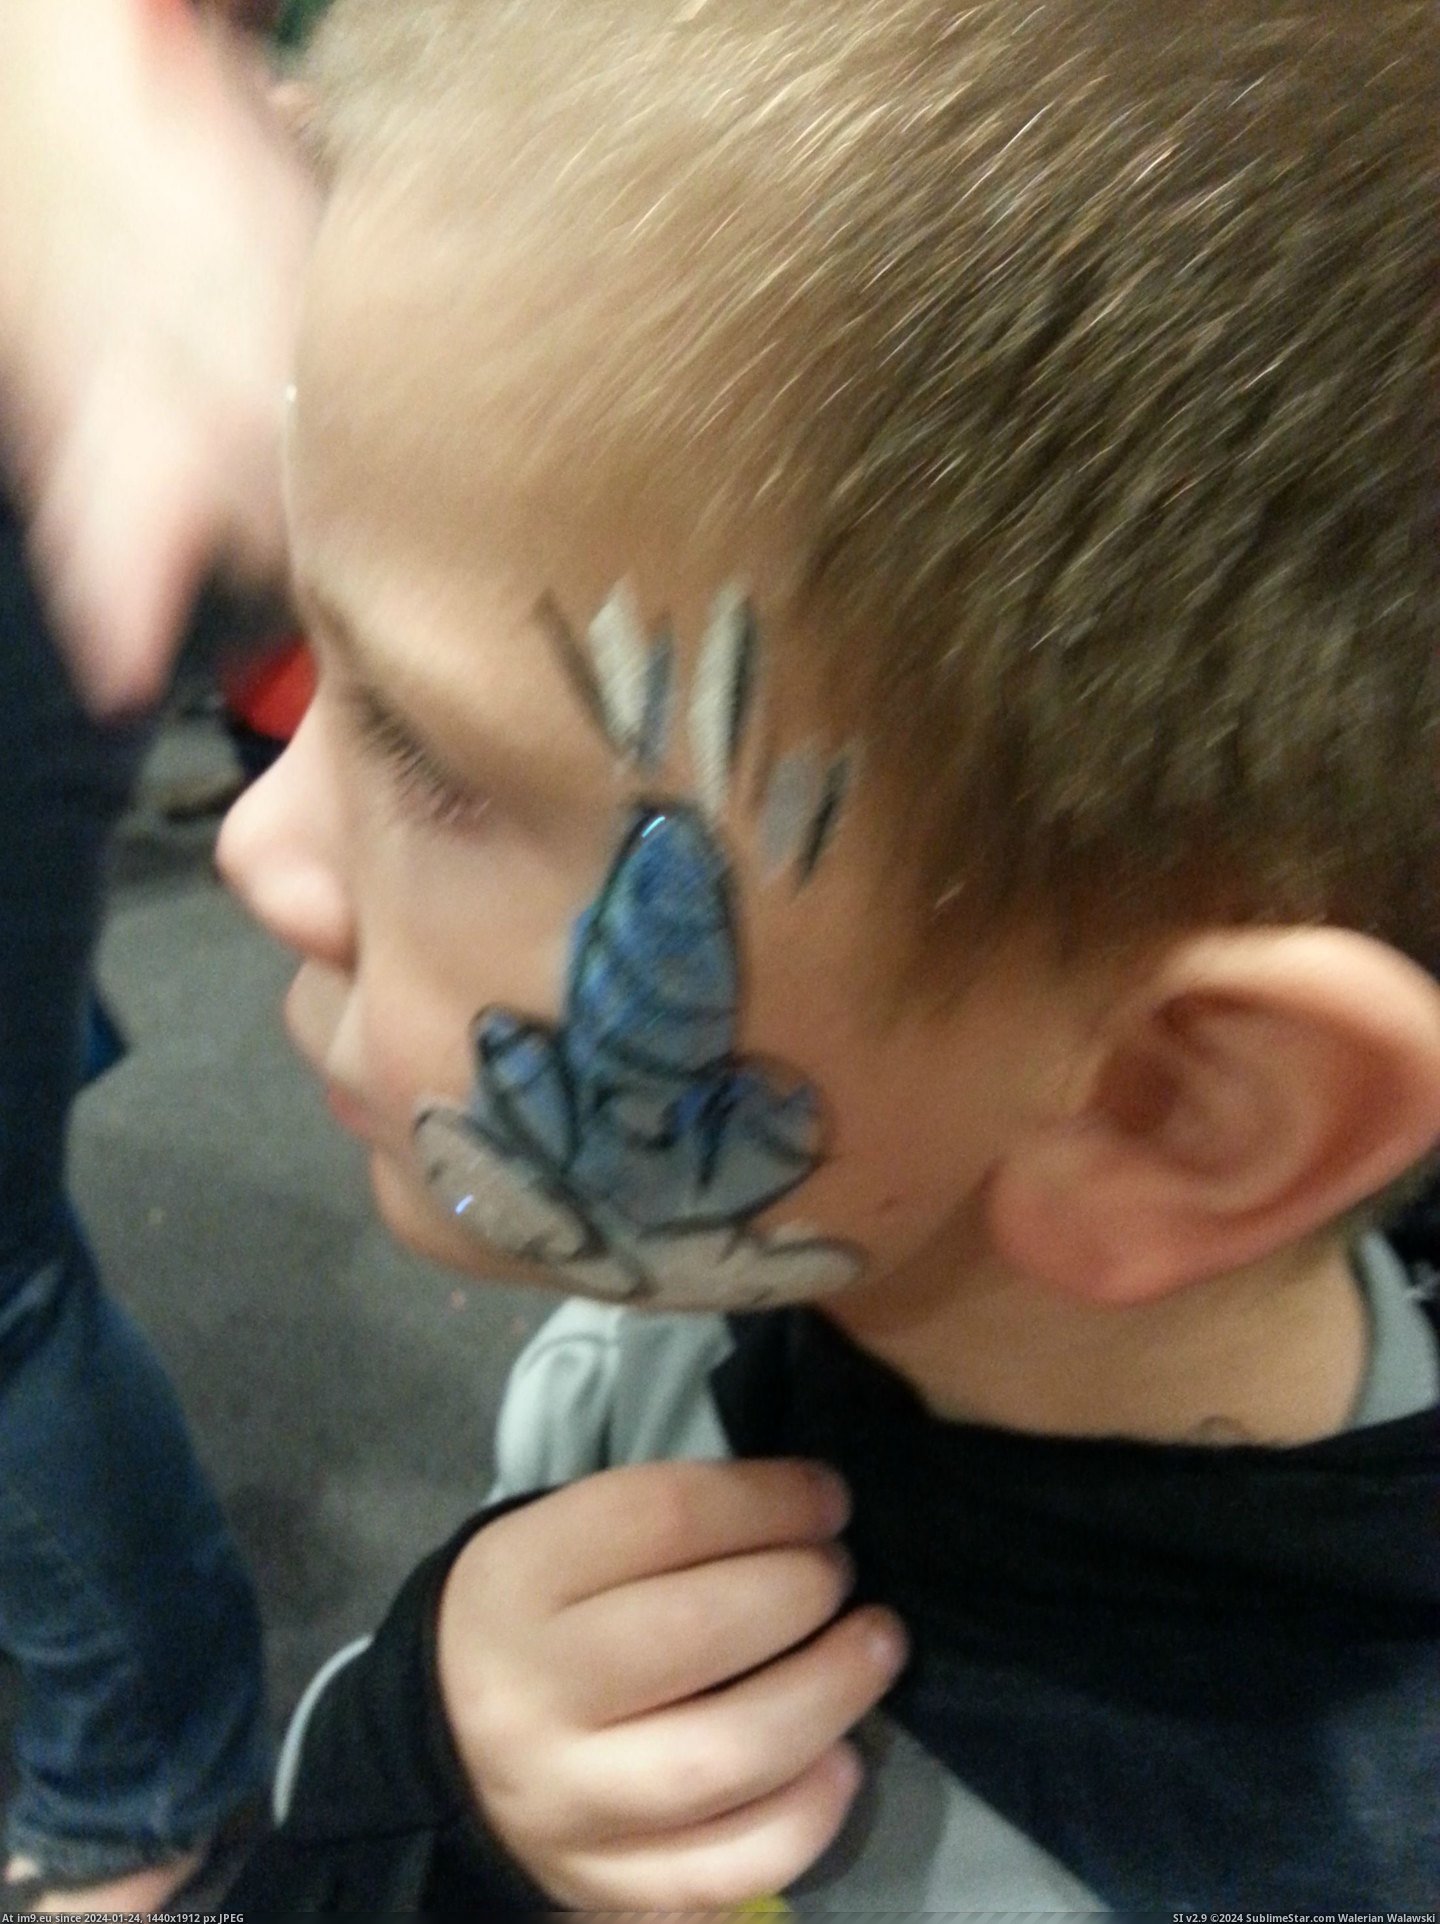 #Wtf #For #Face #Awkward #Evening #Clown #Rocket #Son #Church #Drew [Wtf] A clown drew this 'rocket' on my son's face at a church function. Made for an awkward evening. [OC] Pic. (Obraz z album My r/WTF favs))